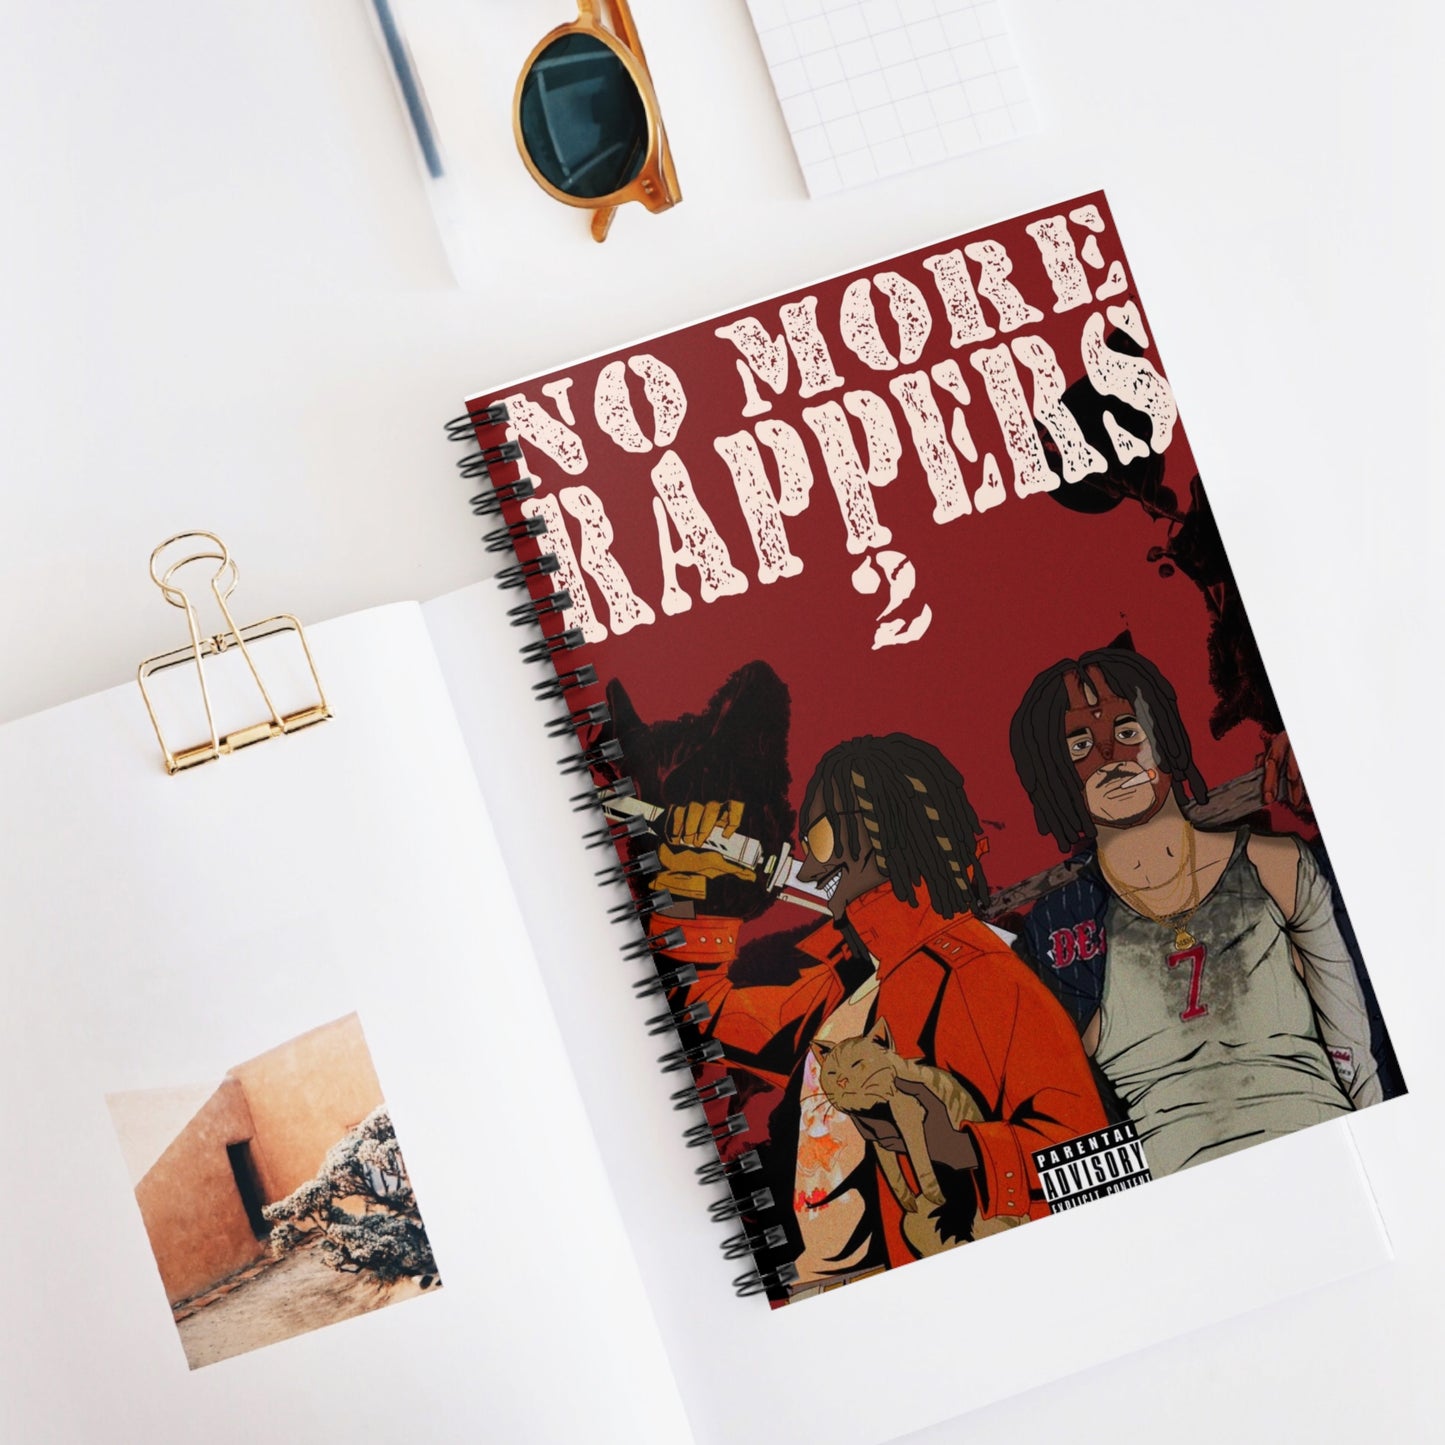 NO MORE RAPPERS 2 RHYME BOOK